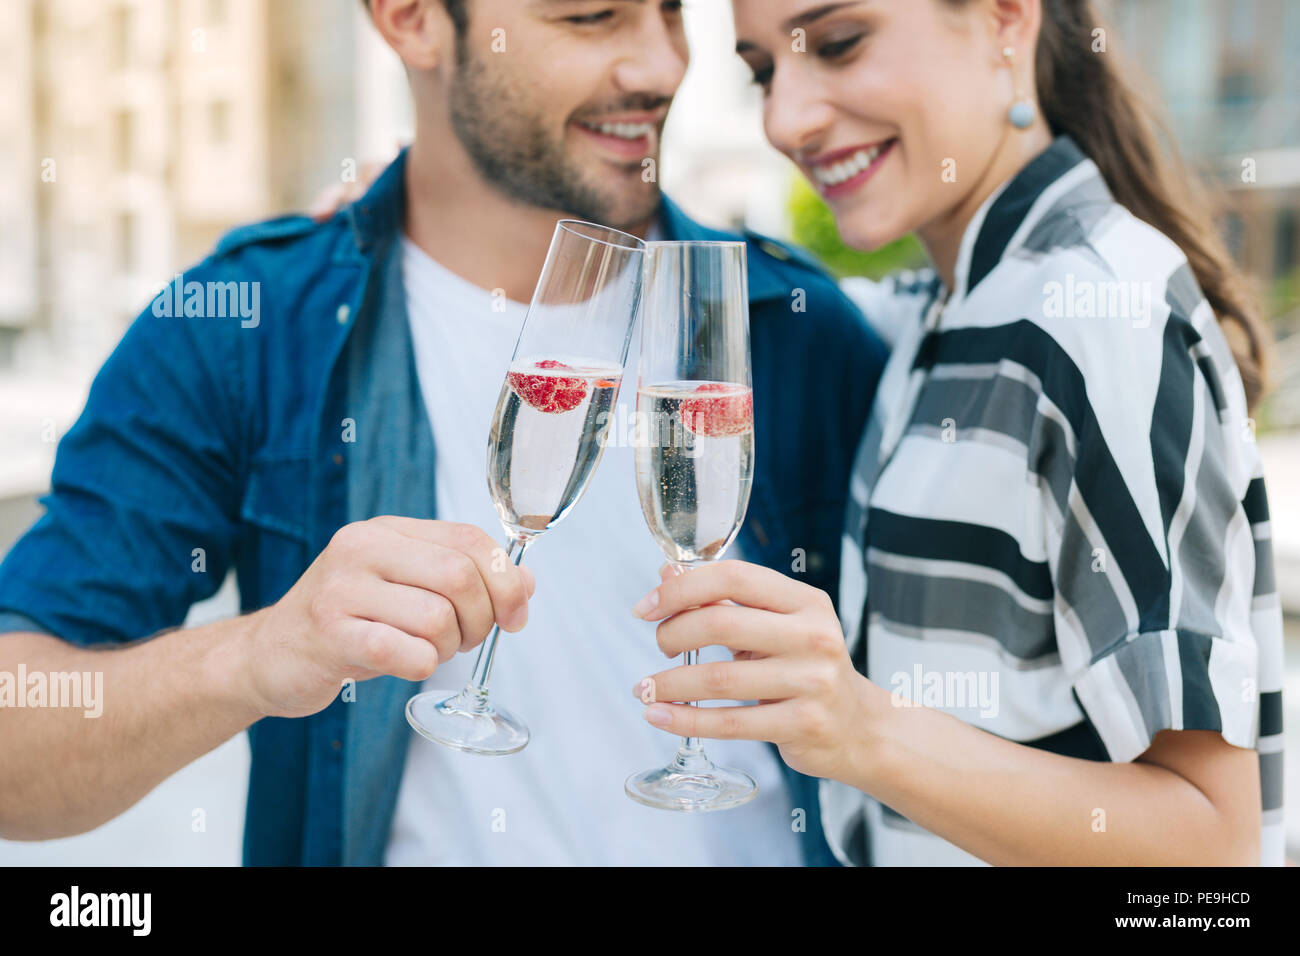 Glasses with champagne being clinked together Stock Photo